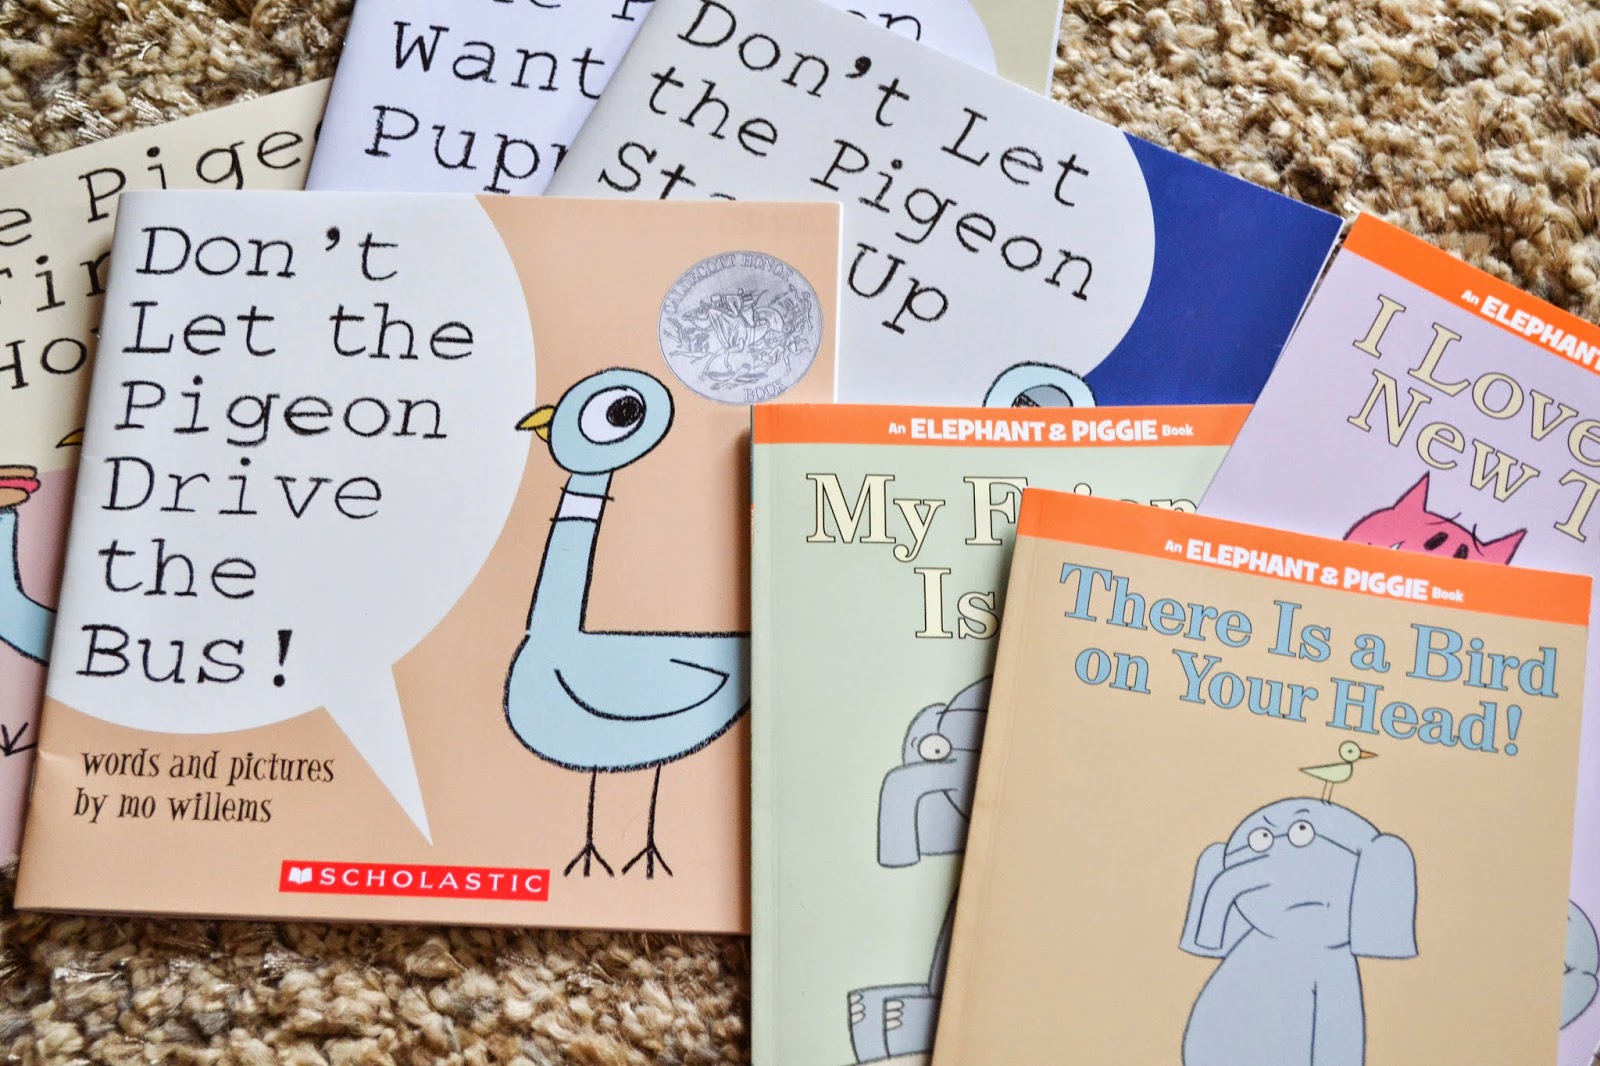 Mo Willems An Author Study with Pigeon, Elephant & Piggie, and